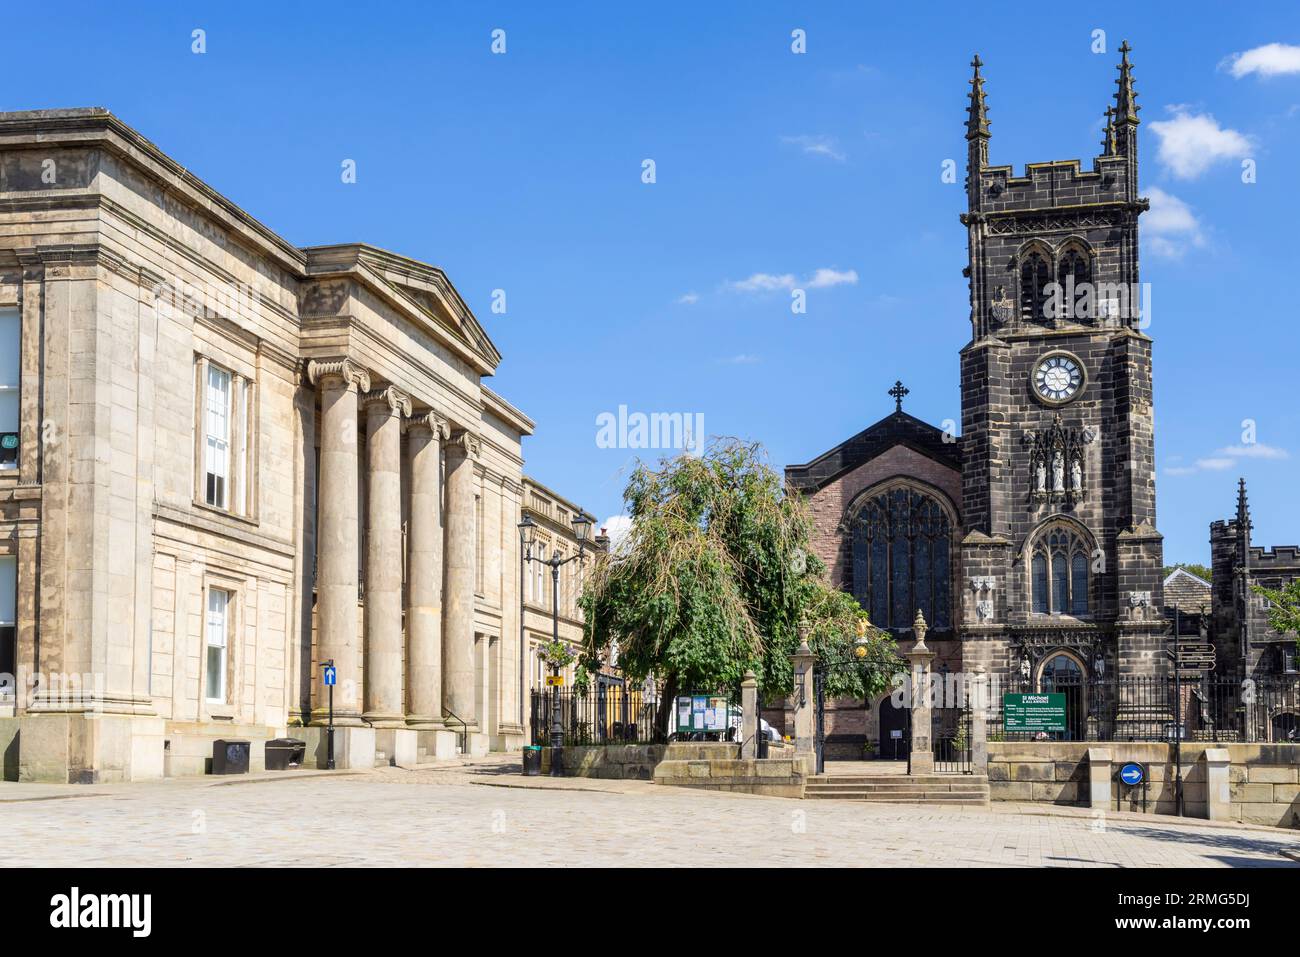 Macclesfield Town Hall Macclesfield und St. Michael and All Angels Church Macclesfield Cheshire East England Großbritannien Europa Stockfoto